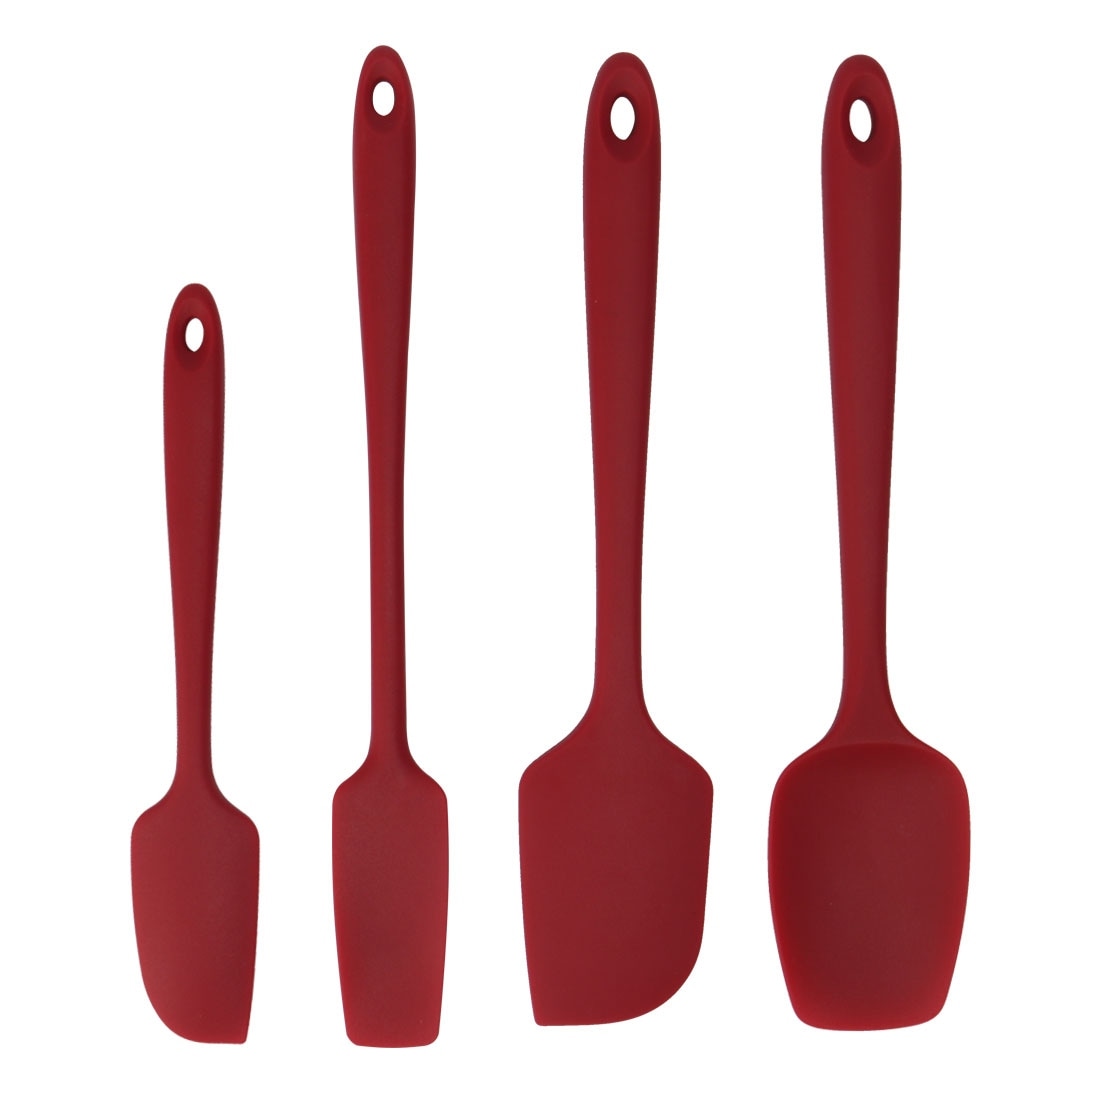 https://ak1.ostkcdn.com/images/products/is/images/direct/0a65094af17135c8970a736eef7e59aadf397c17/Silicone-Spatula-Set-4Pcs-Heat-Resistant-Non-Stick-for-Kitchen-Cooking.jpg